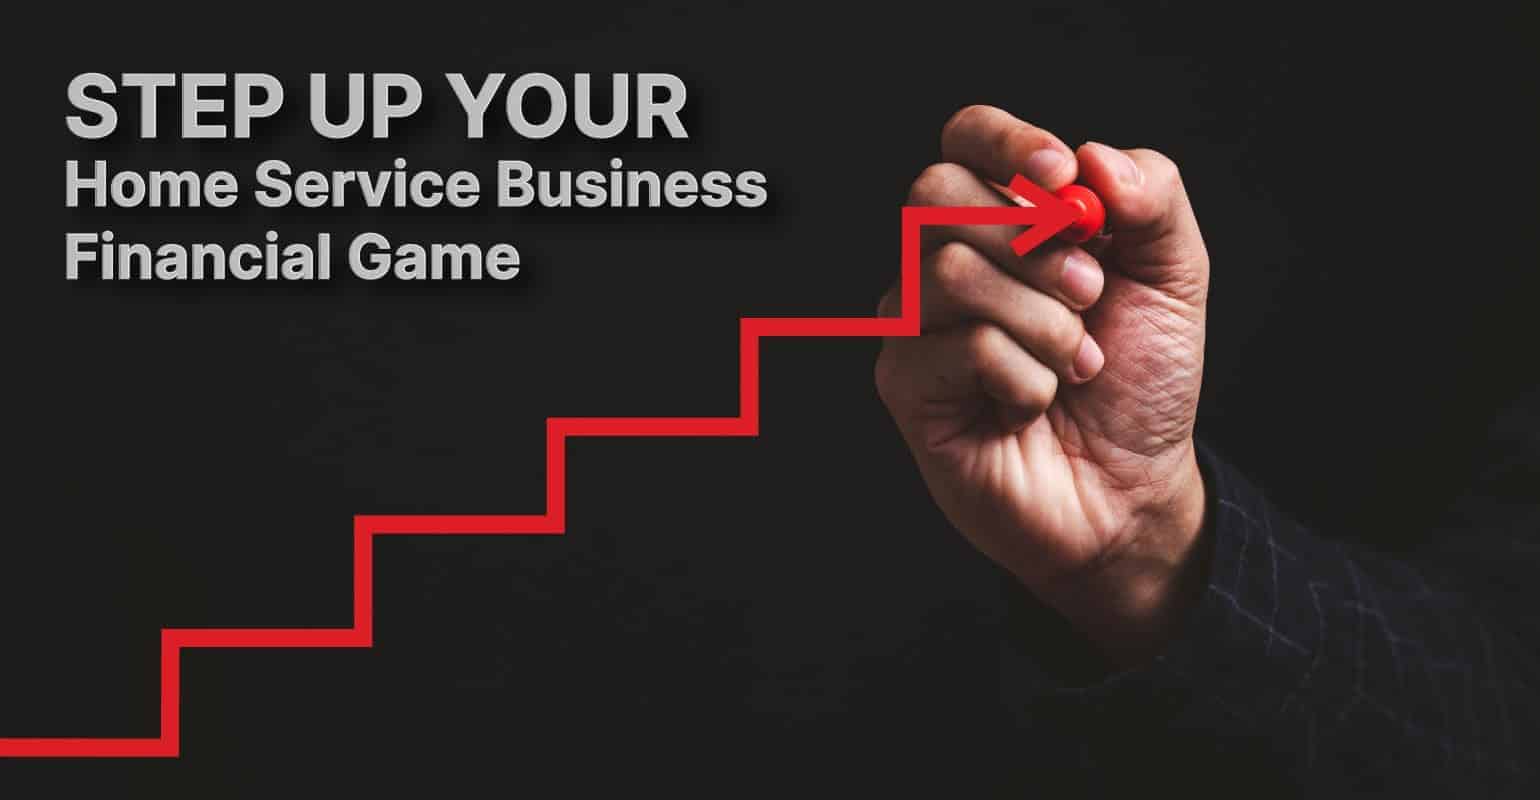 Step Up Your Home Service Business Financial Game